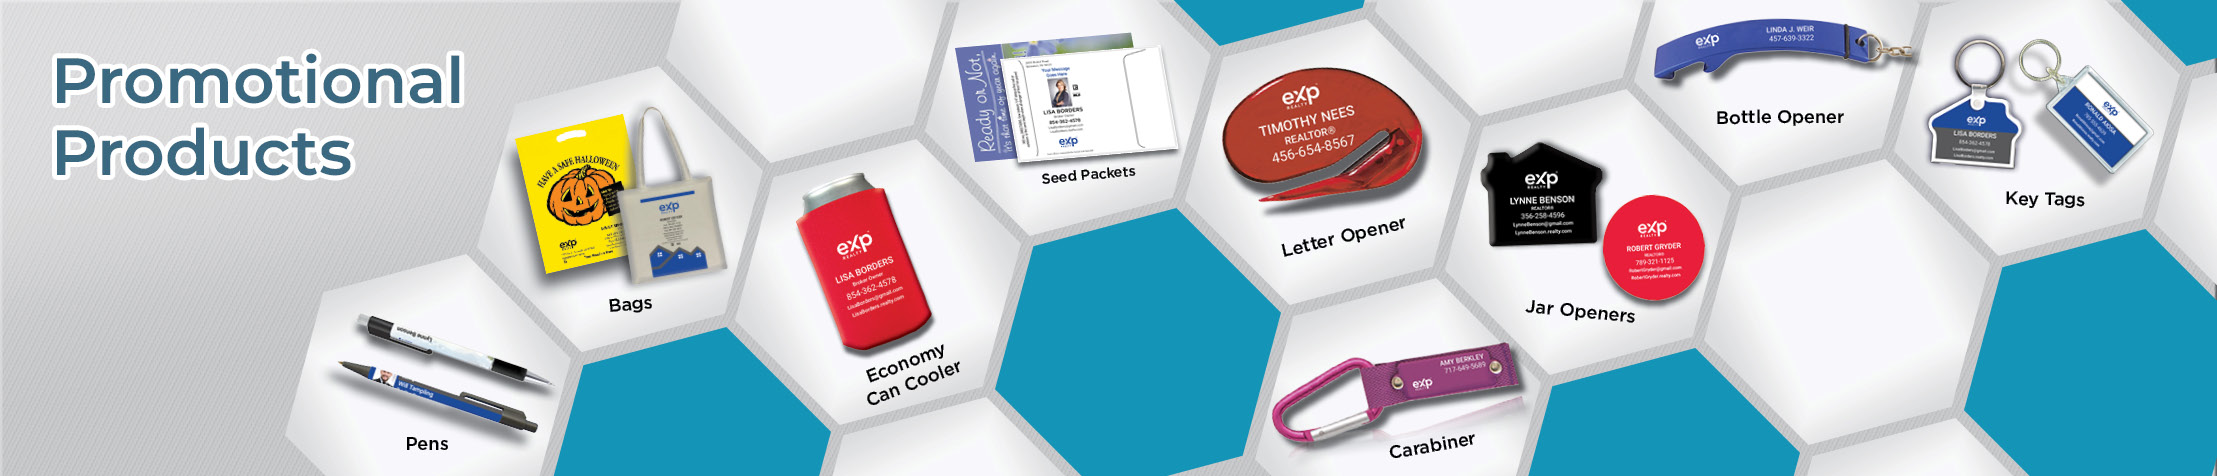 eXp Realty Real Estate Promotional Products - eXp Realty  personalized promotional pens, key chains, tote bags, flashlights, mugs | BestPrintBuy.com